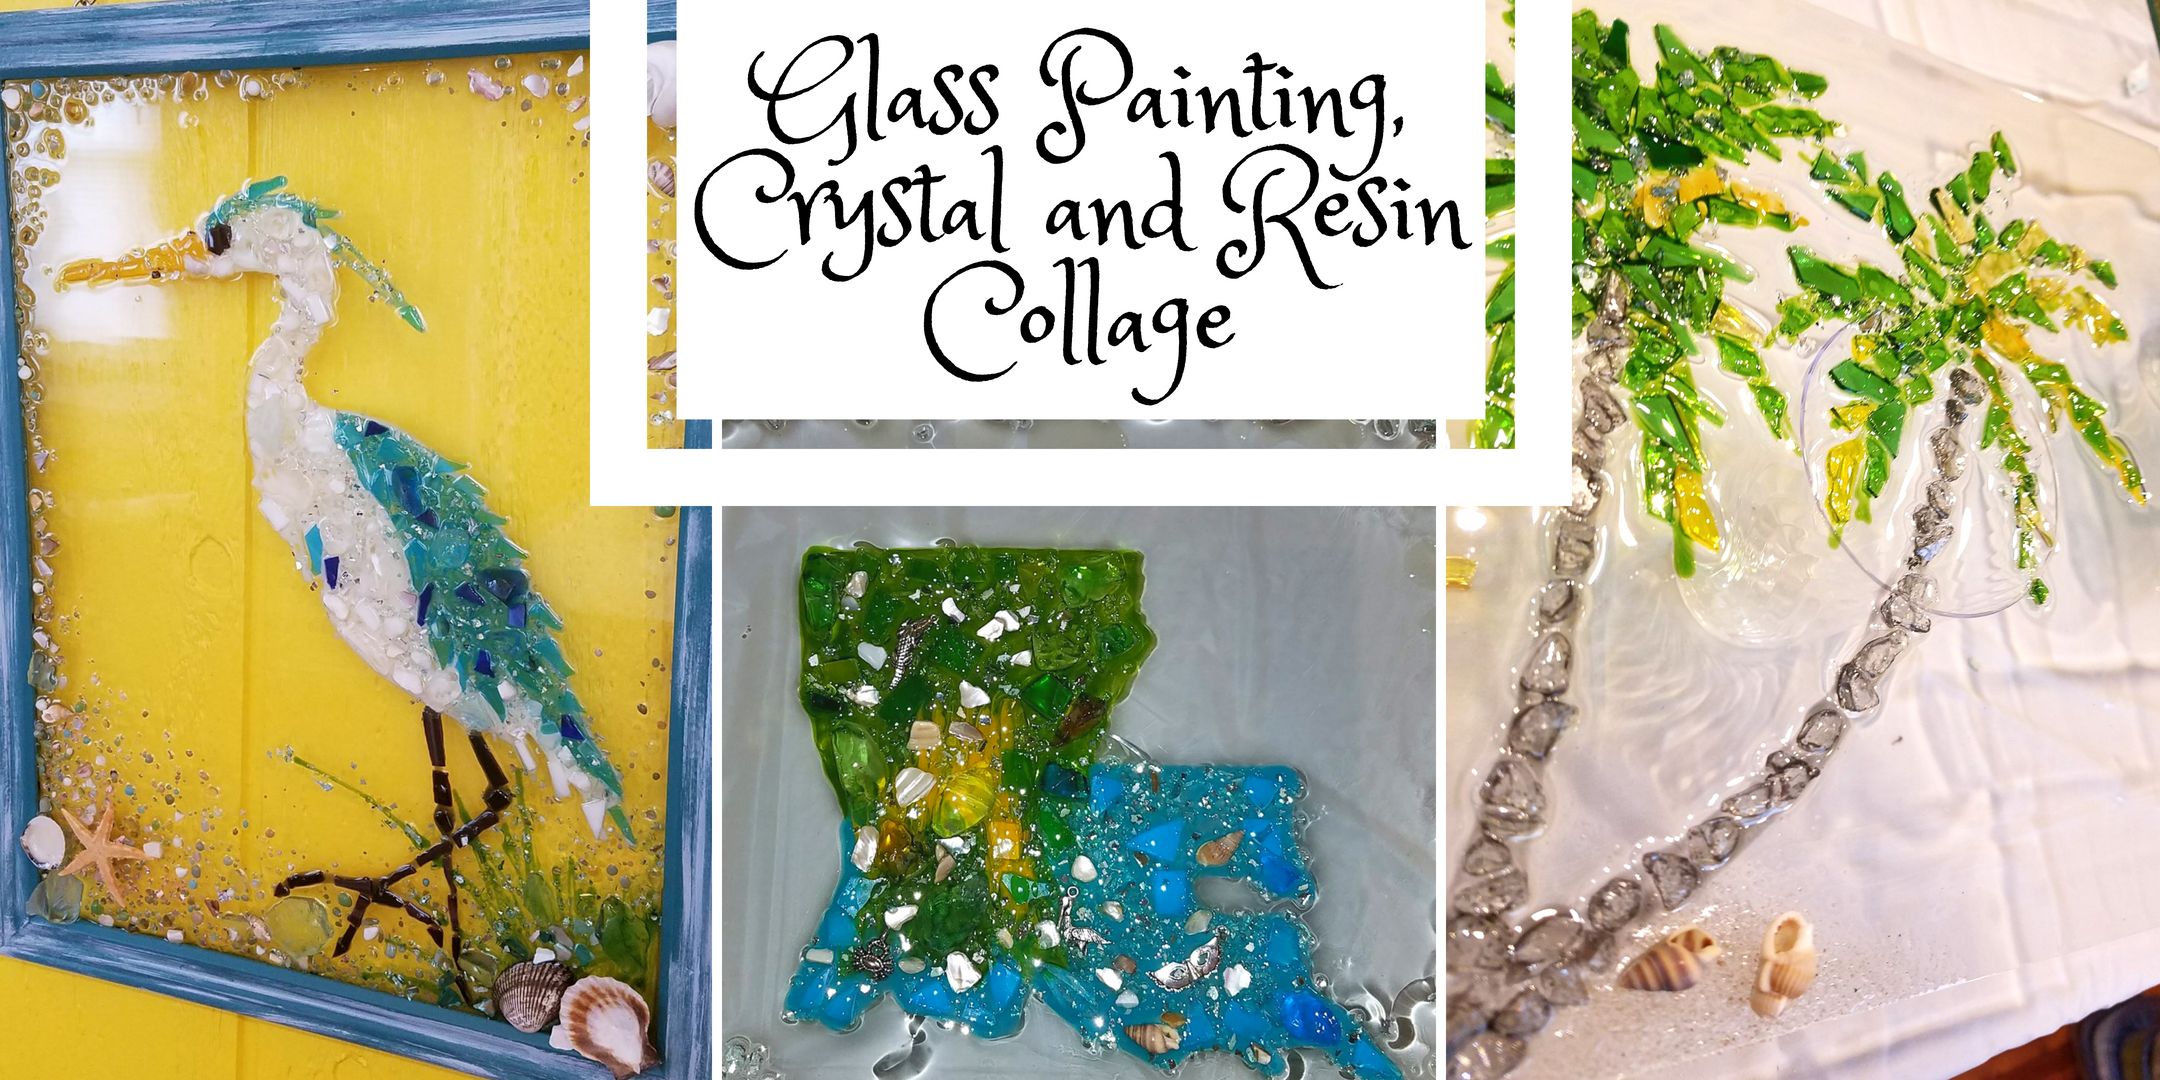 Glass Painting, Crystal and Resin Collage